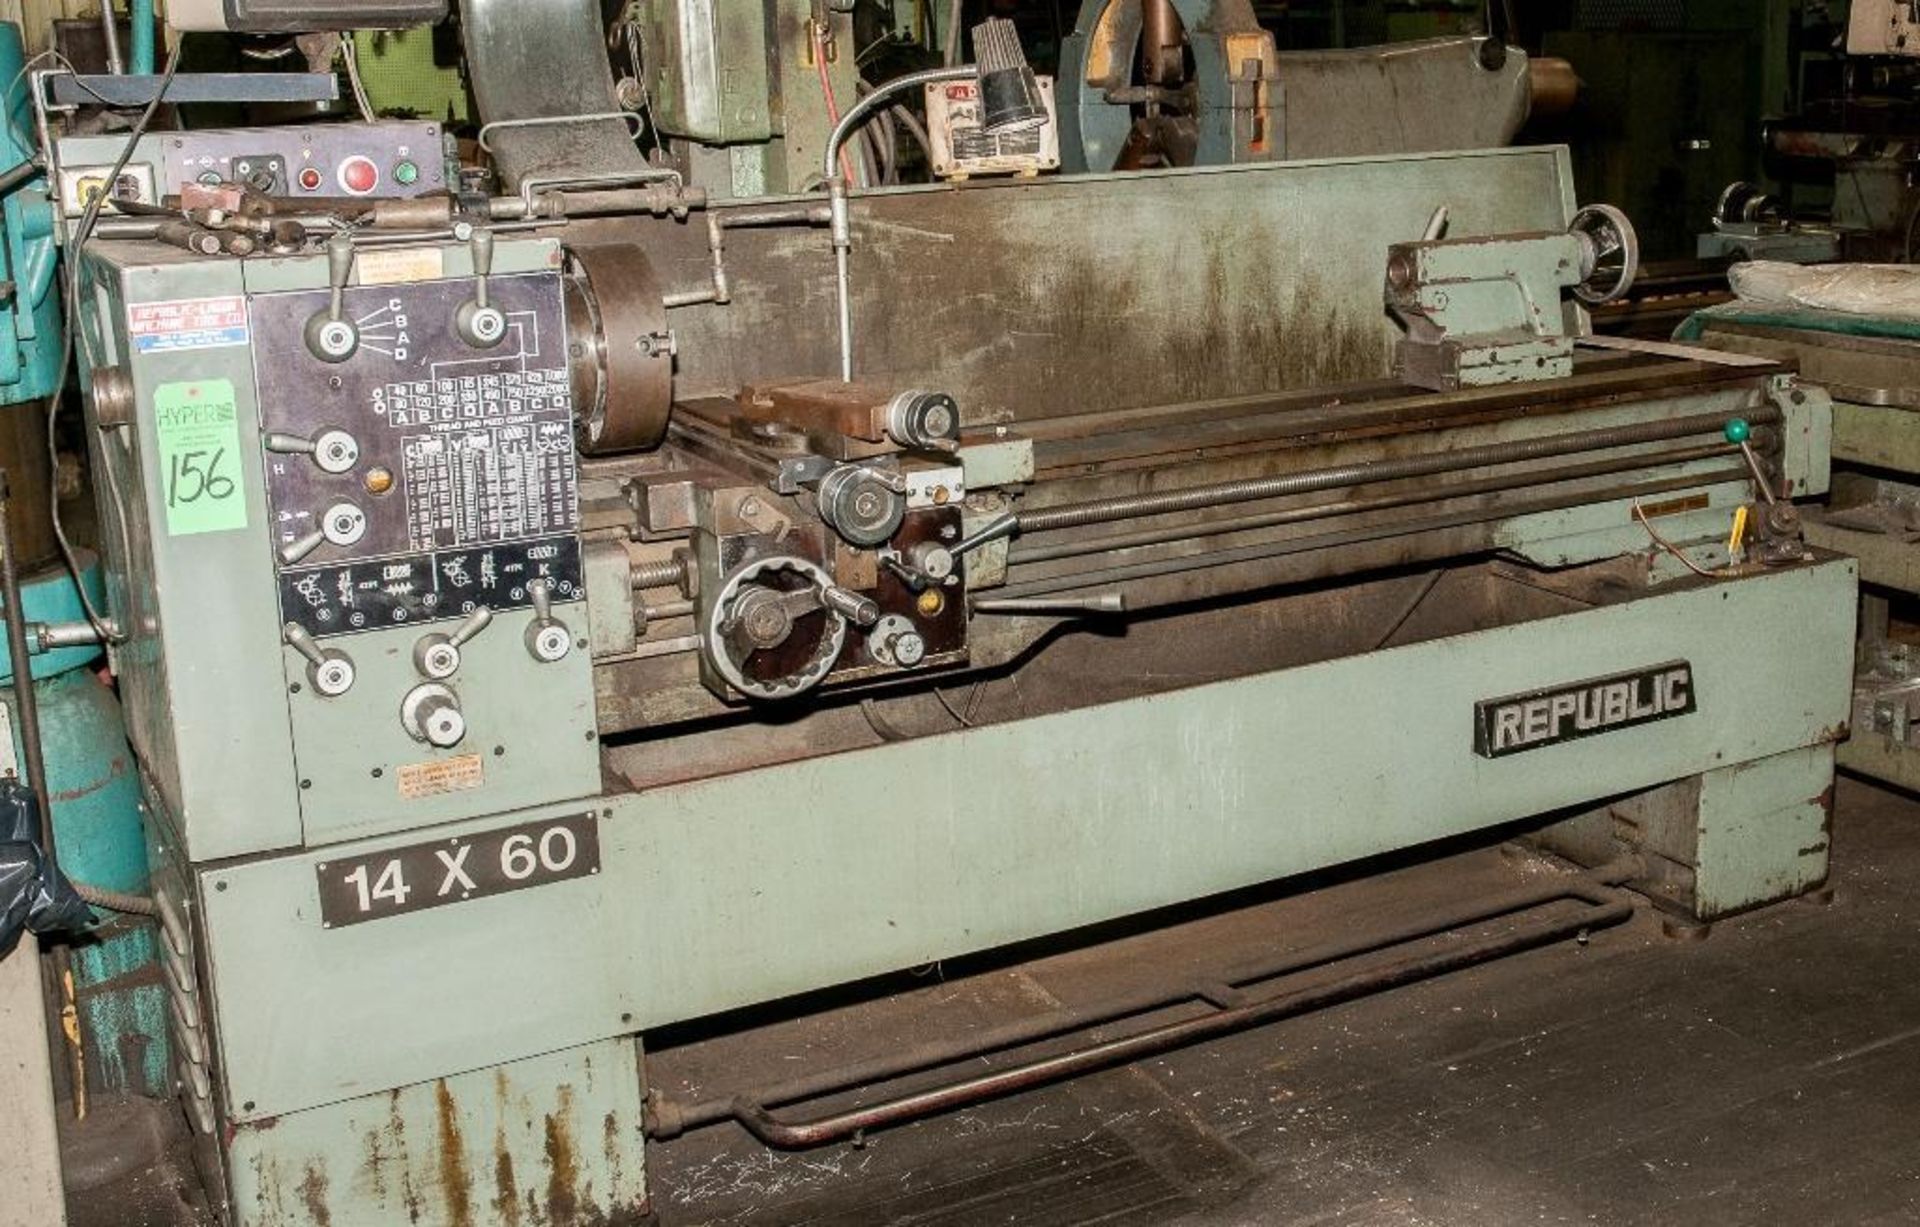 Republic 14" X 60" Geared Head Engine Lathe, S/N 14683080058, 2" Hole, (16) Speed From 40 To 2000 RP